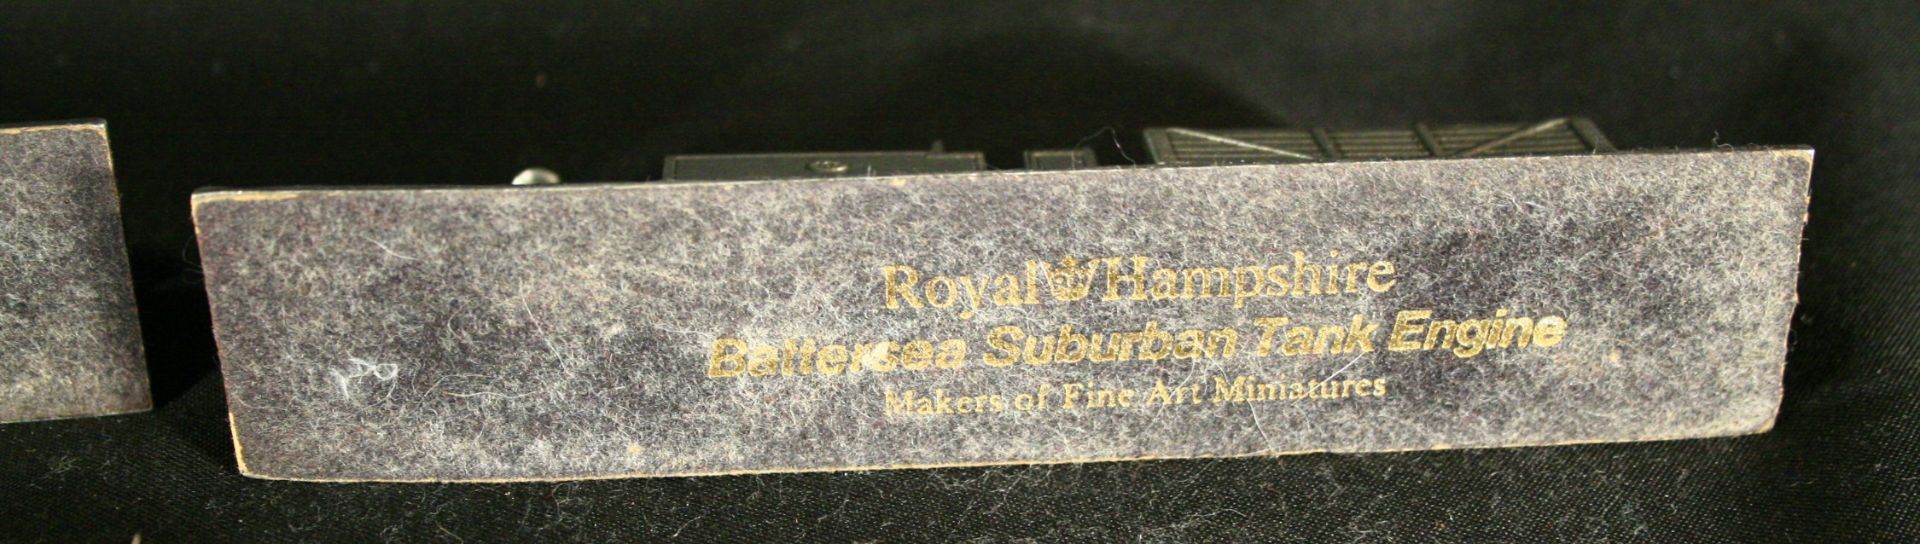 Vintage 3 x Collectable Royal Hampshire Pewter Train Models - Image 4 of 4